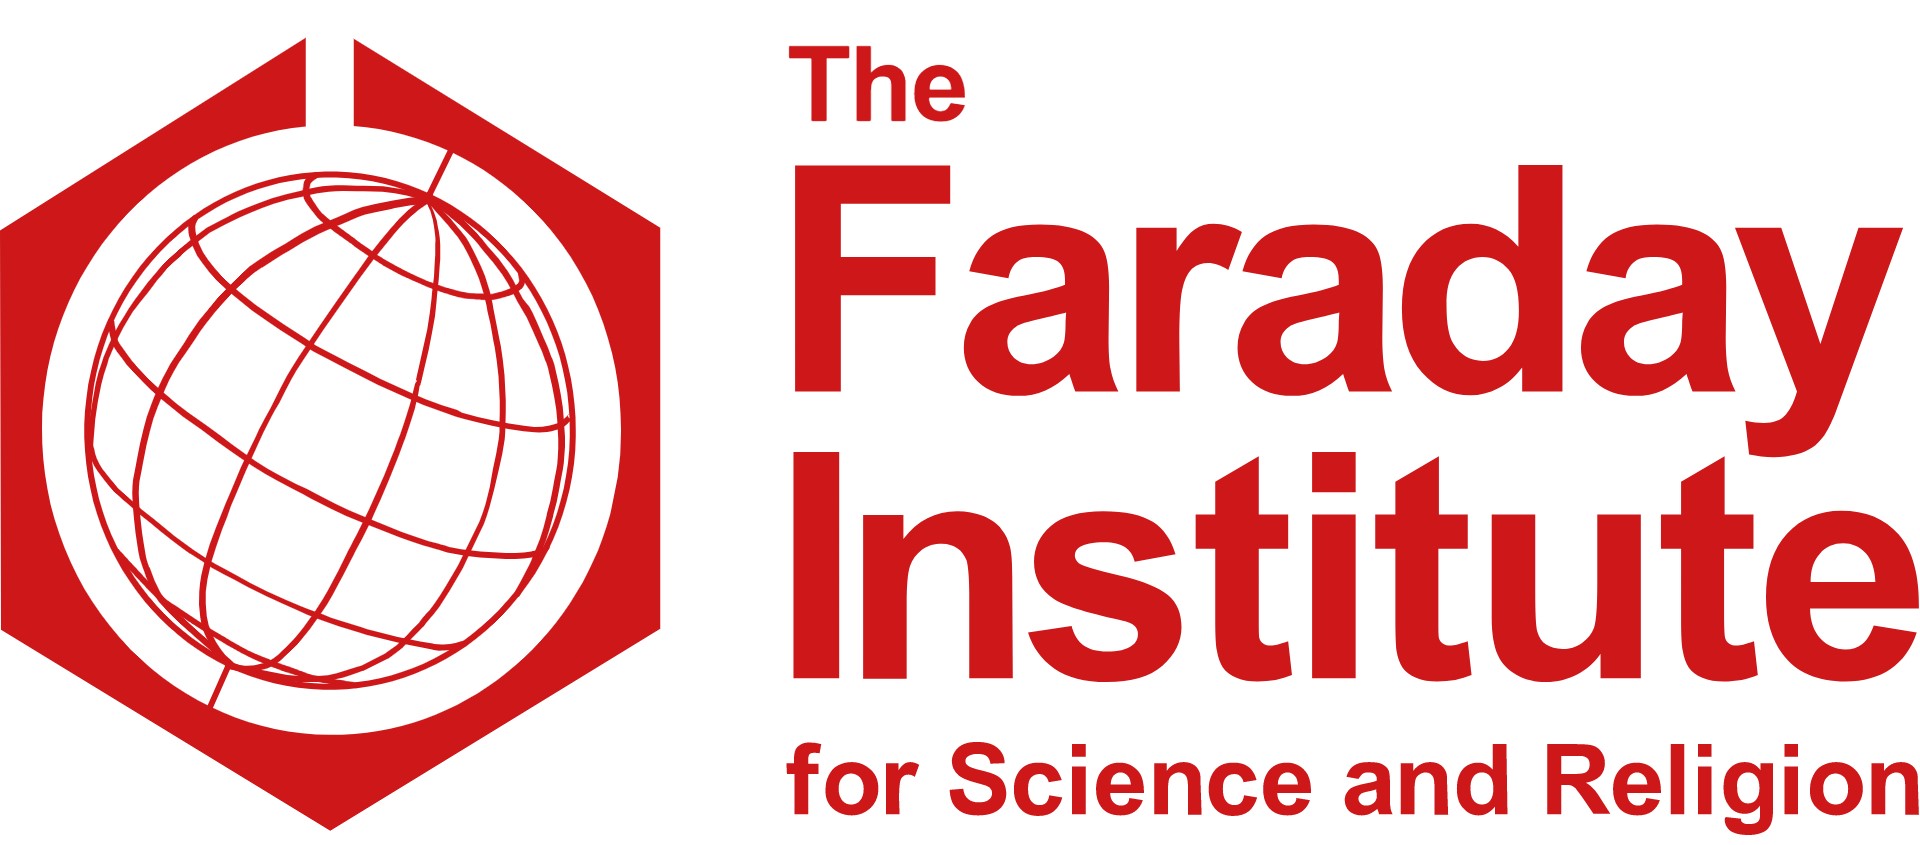 The Faraday Institute for Science and Religion